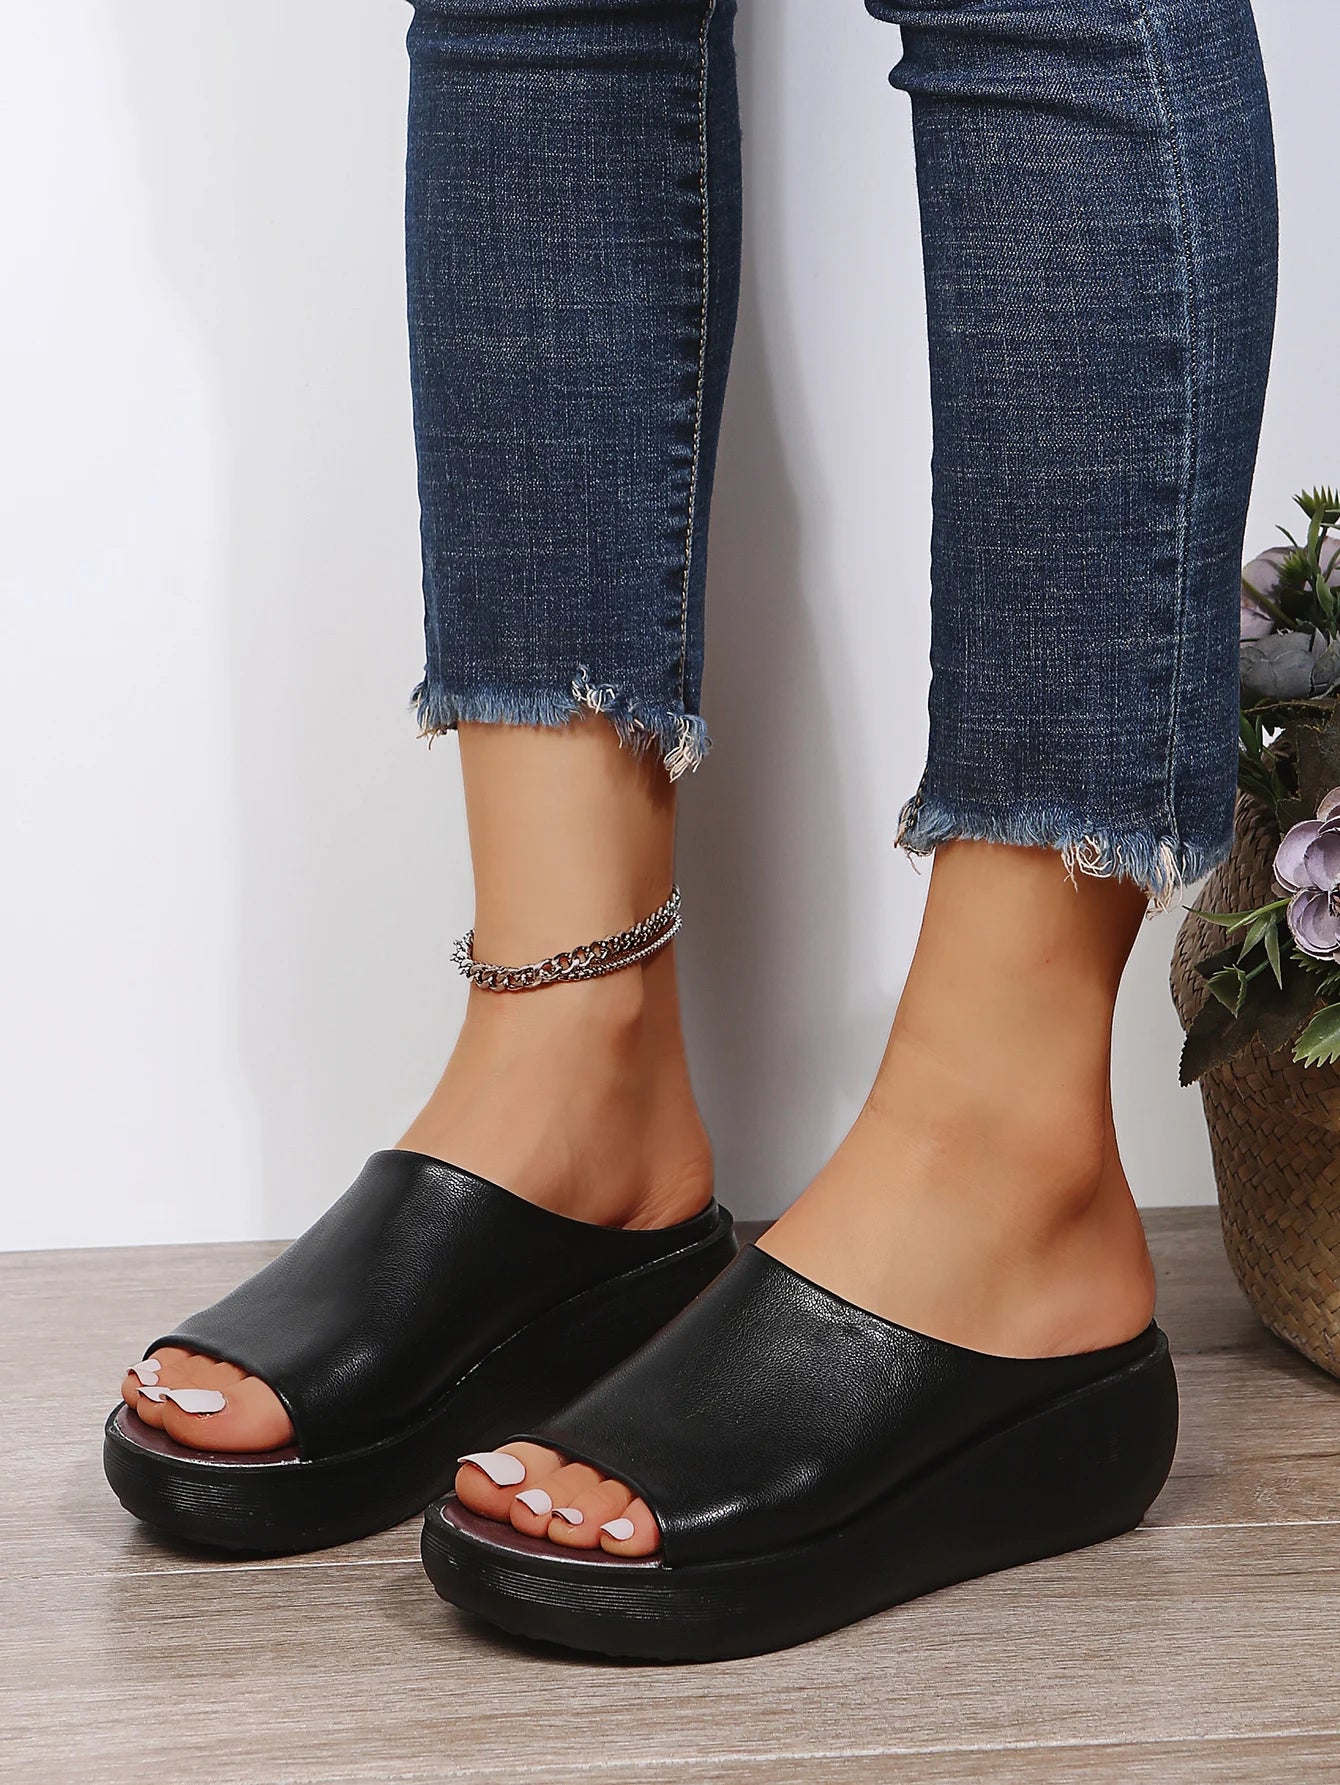 summer sandals, ankle strap sandals, ankle strap flats, trendy outfit for women, cute sandals, women casual shoes for sale Florida, Prolyf online clothing store, cute church outfit for women Florida, ethnic sandals, wedge sandals, comfortable sandals, stylish sandals